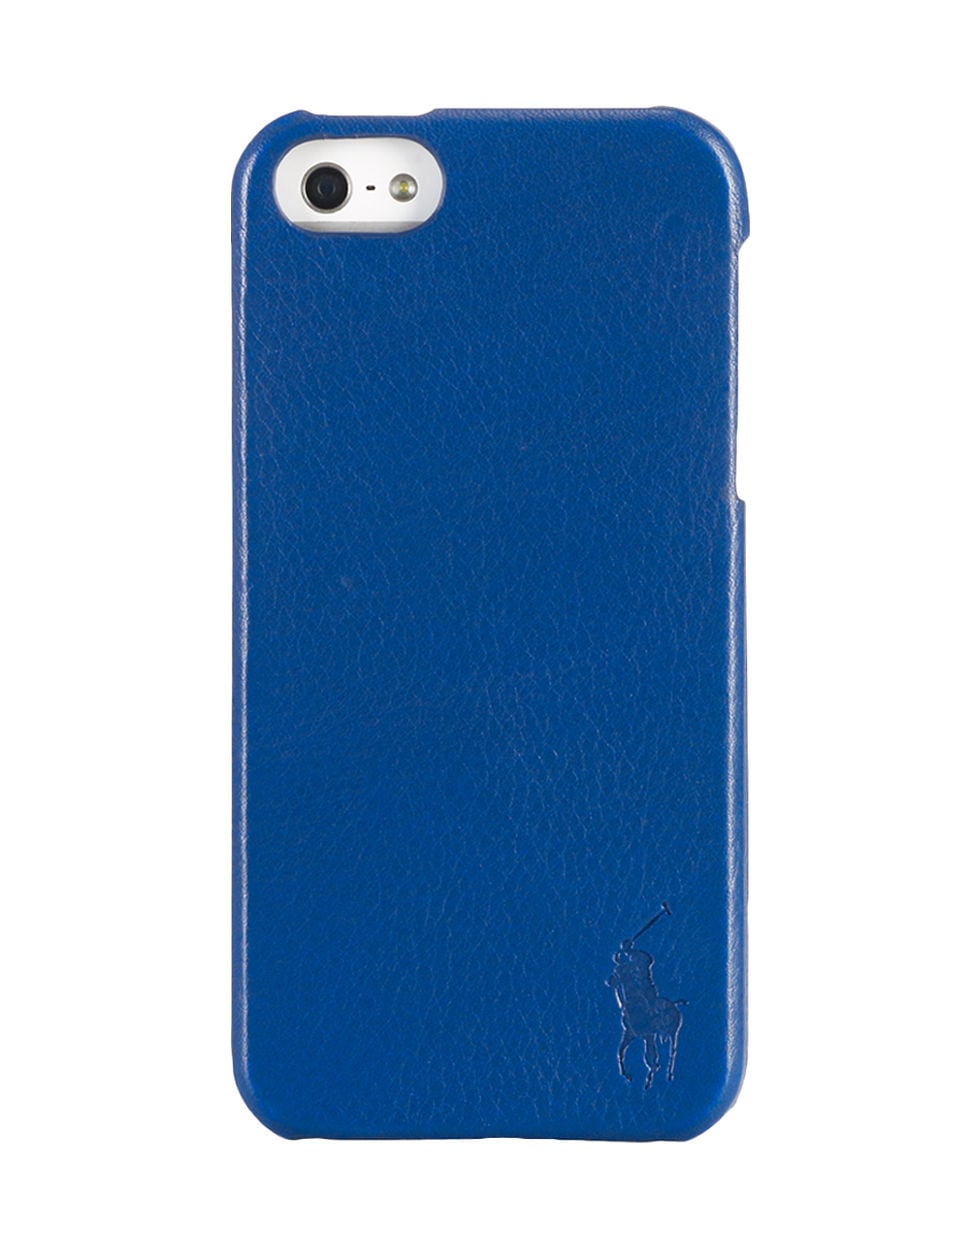 Polo Ralph Lauren iPhone Case | 33 Chic and Useful Father's Day Presents  For $25 and Under | POPSUGAR Latina Photo 8